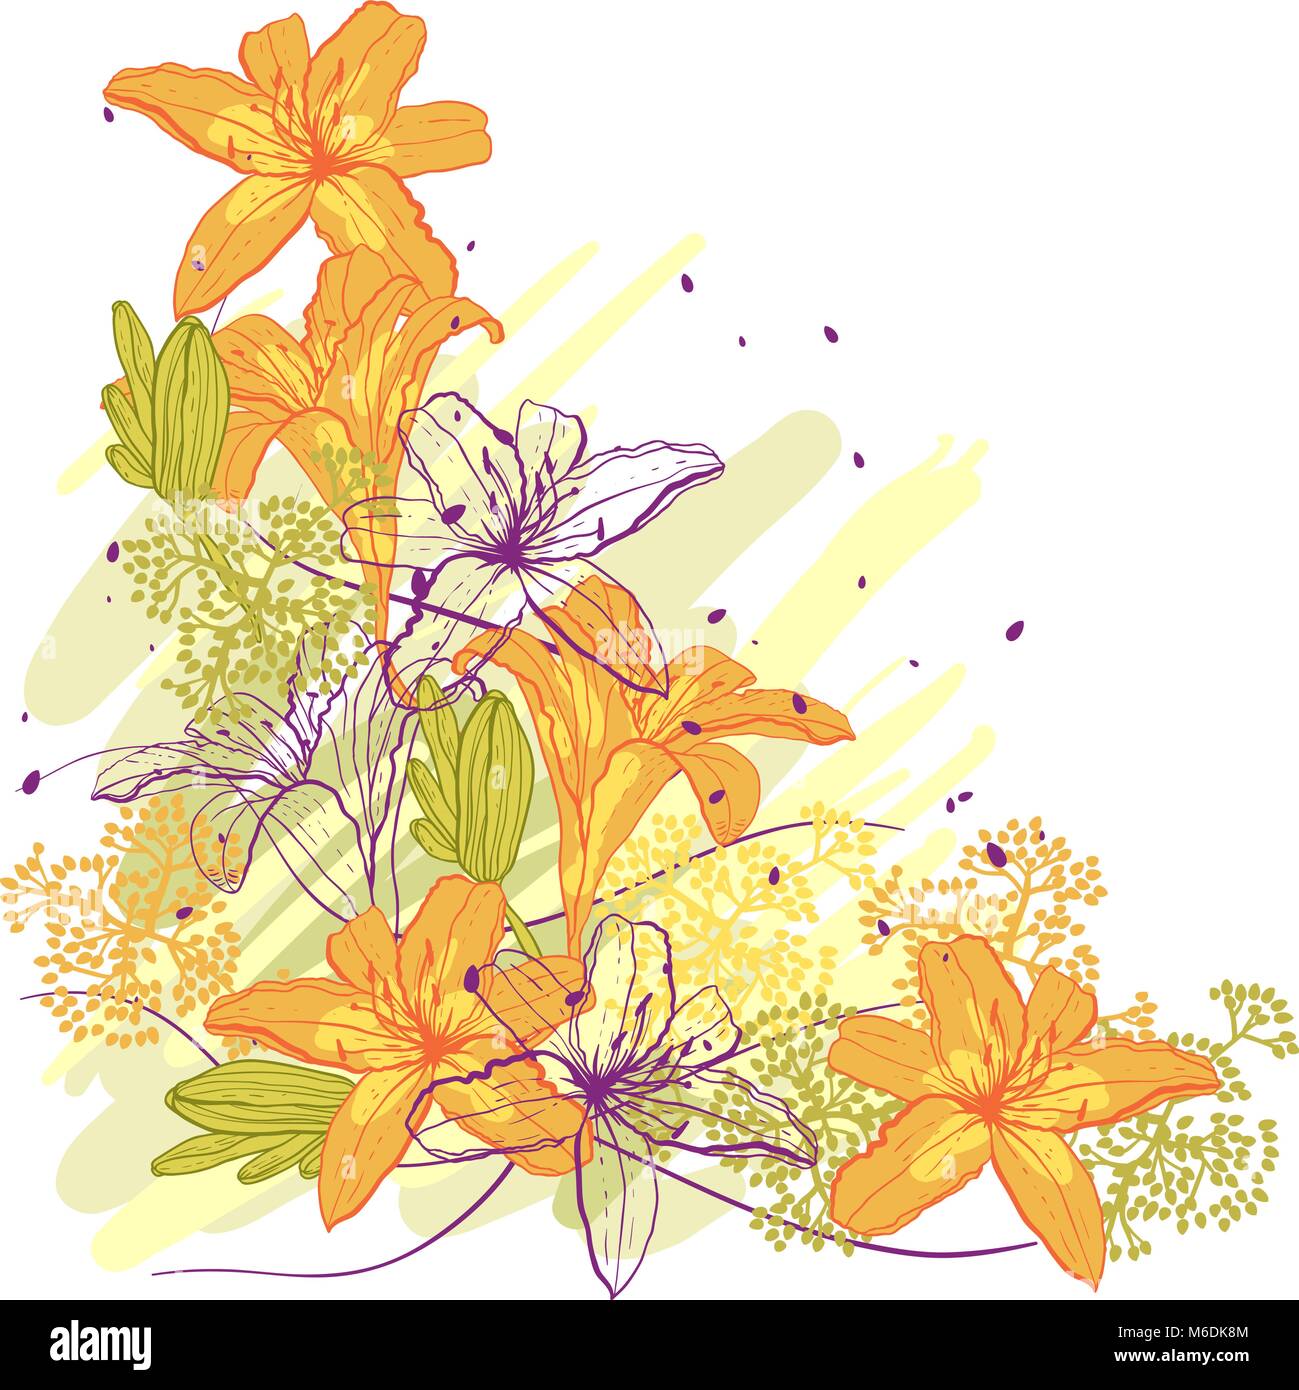 Lily flower abstract vector background. Stock Vector